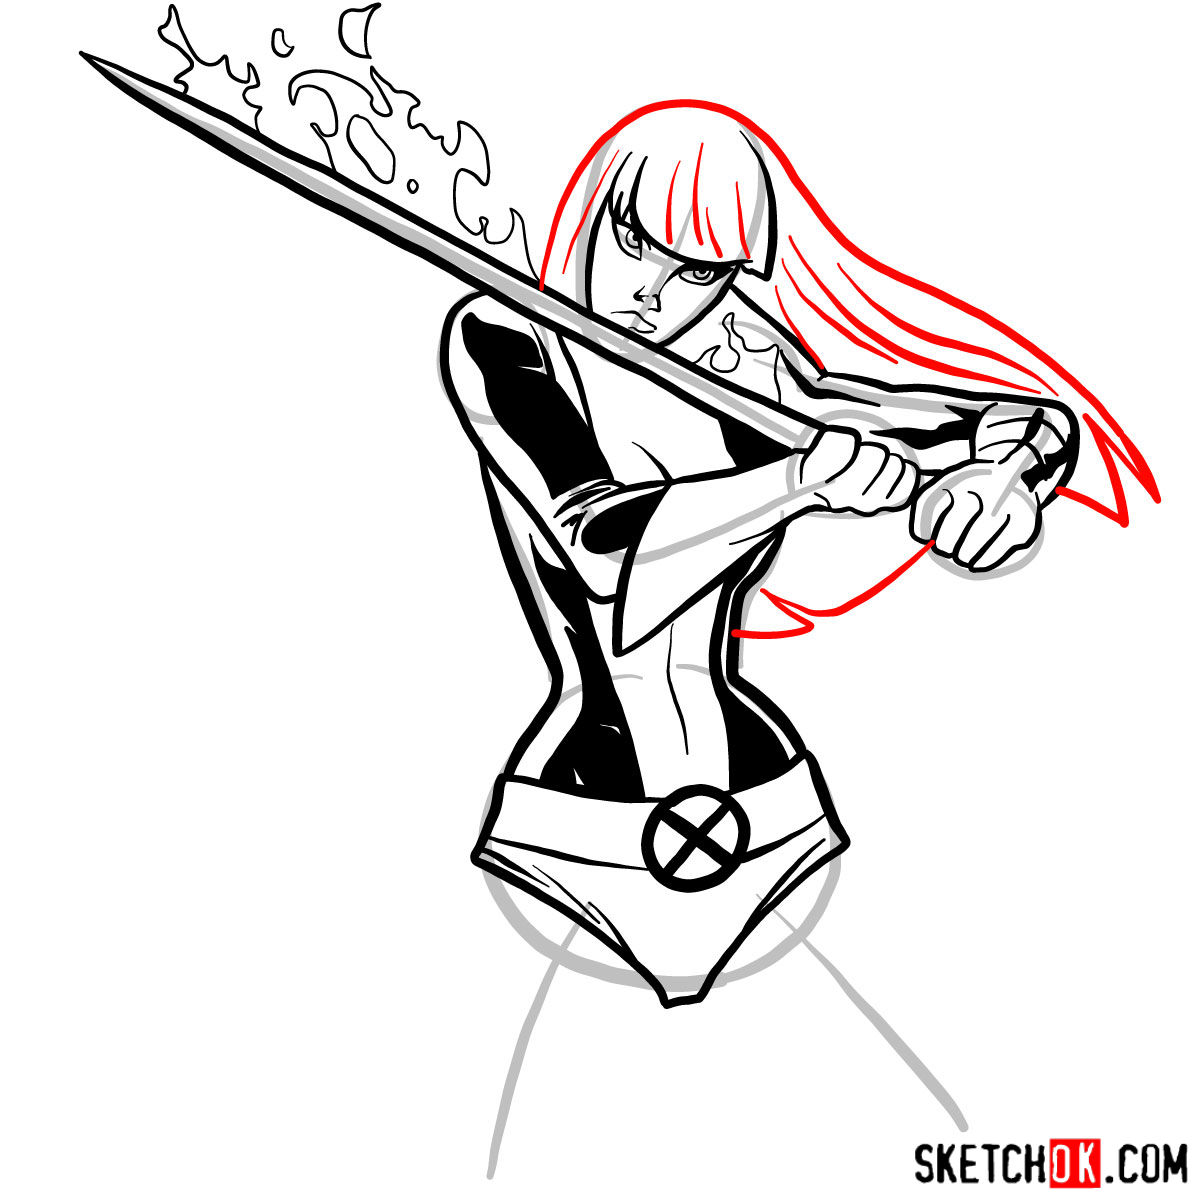 How to draw Magik, a mutant from X-Men - step 10